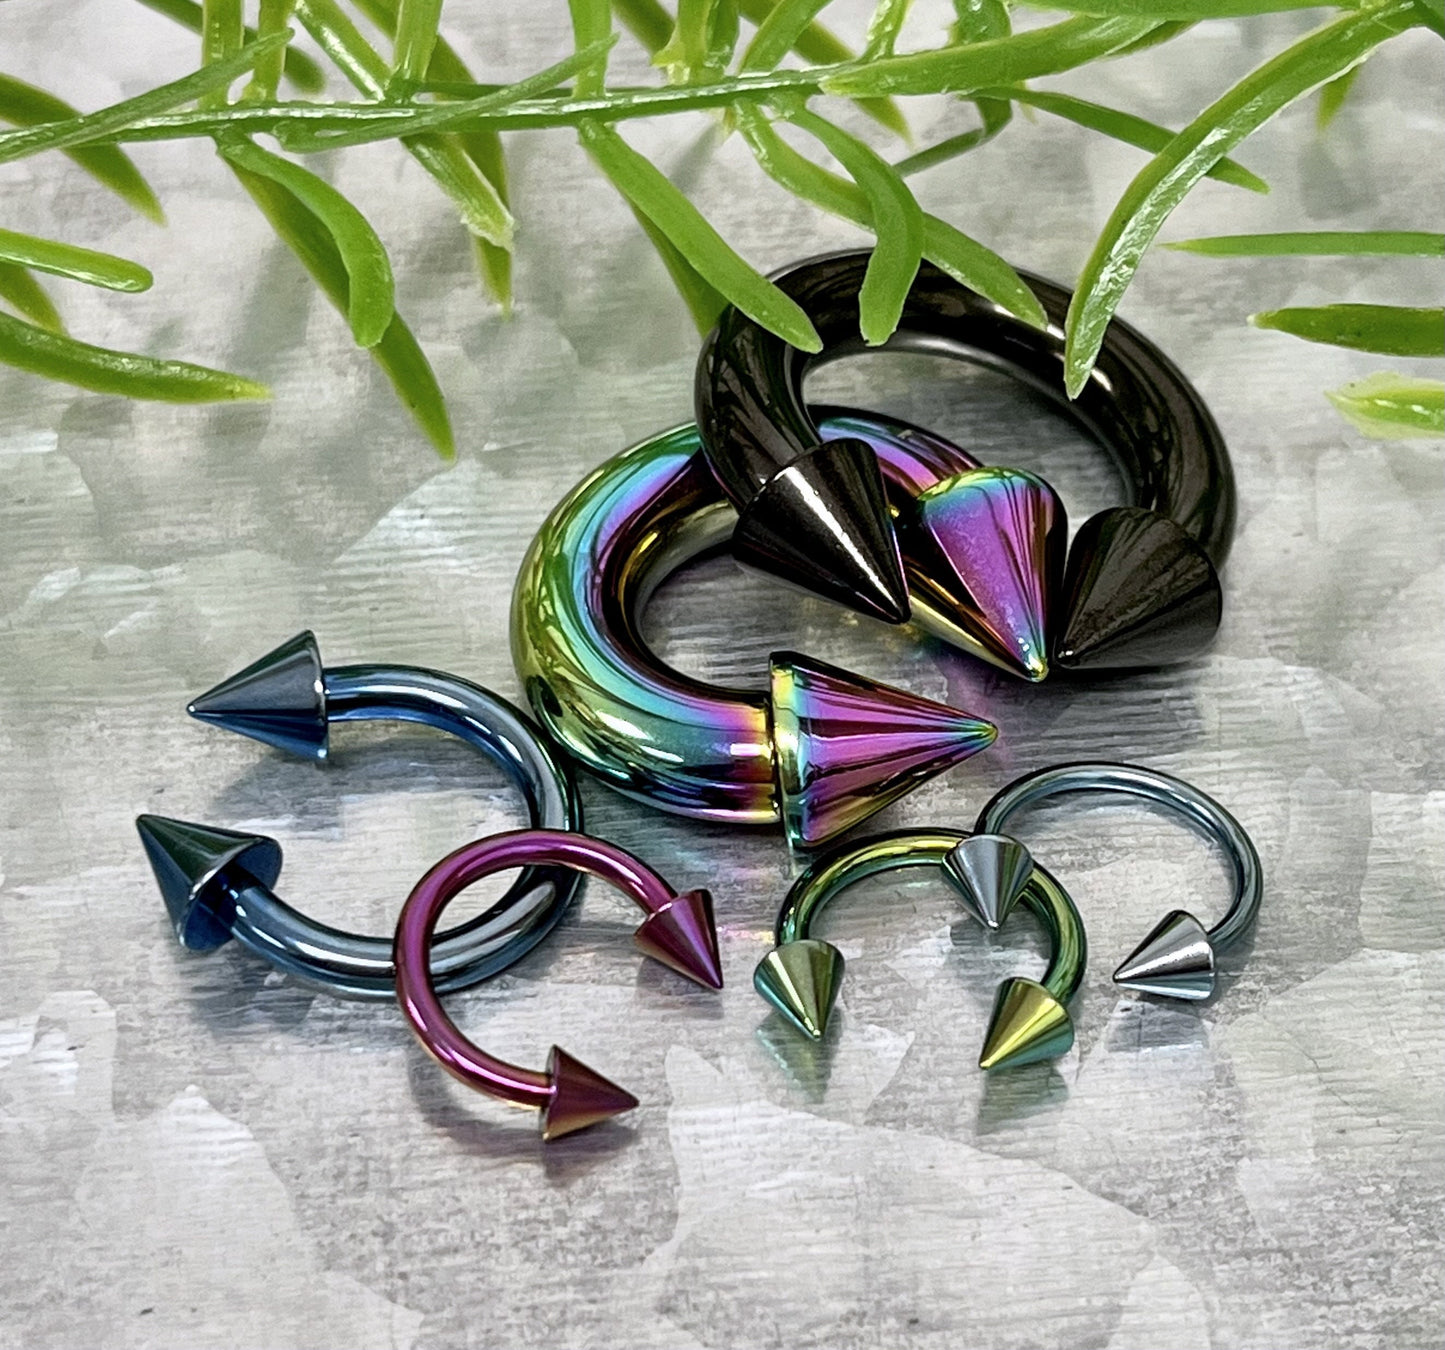 1 Piece Stunning Titanium Spiked Barbell Horseshoe Ring - 16g thru 12g - OTHER Colors Available in our listings!